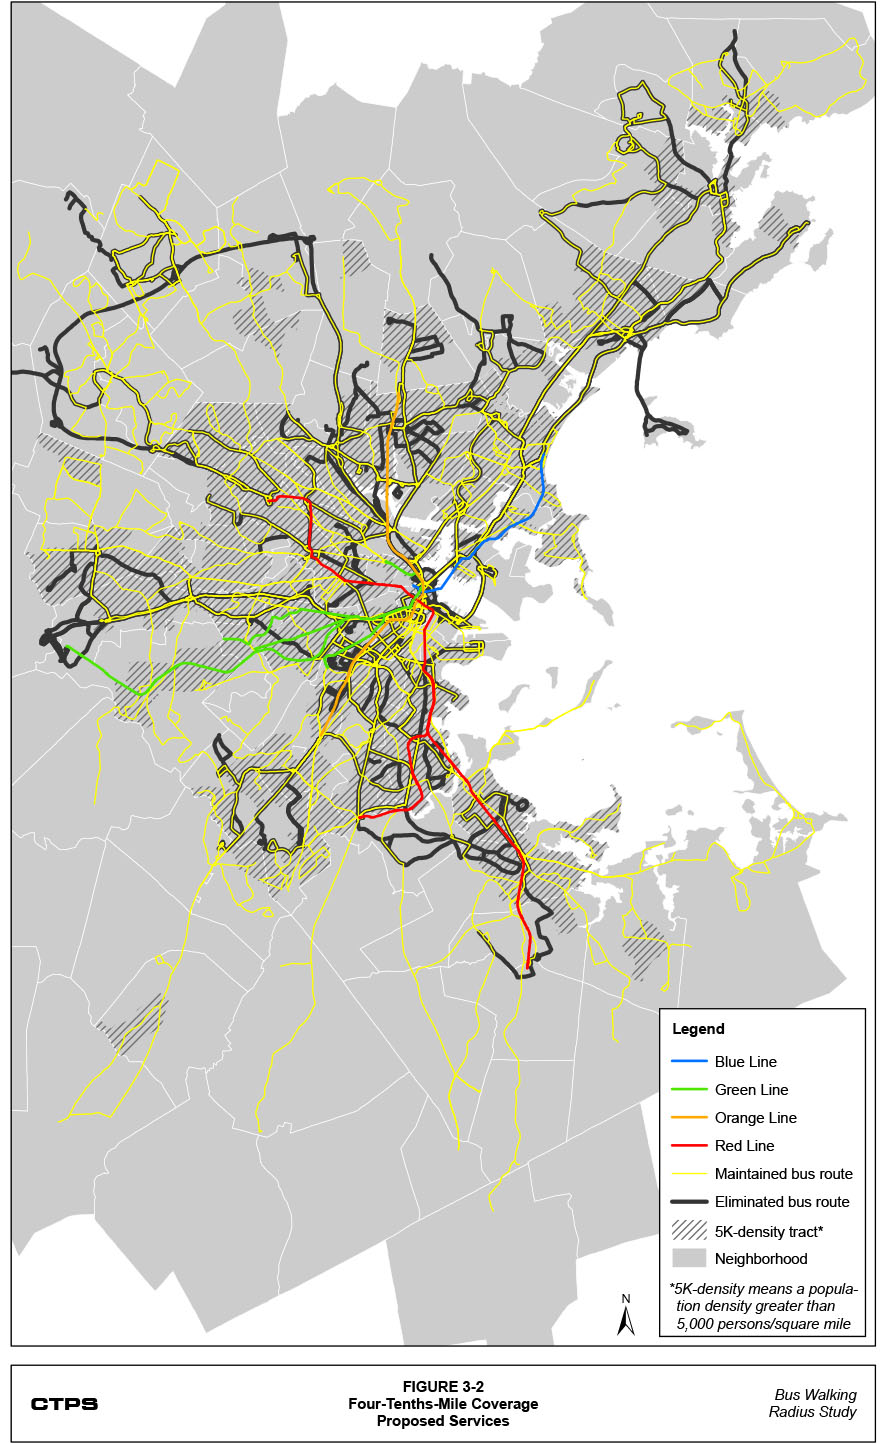 Figure 3-2: Four-Tenths-Mile Coverage Proposed Services. This is a map that shows the transit routes that are proposed for maintenance and elimination in the service plan for the four-tenths-mile coverage threshold. The map also shows the location of census tracts with a population density greater than 5,000 persons per square mile.